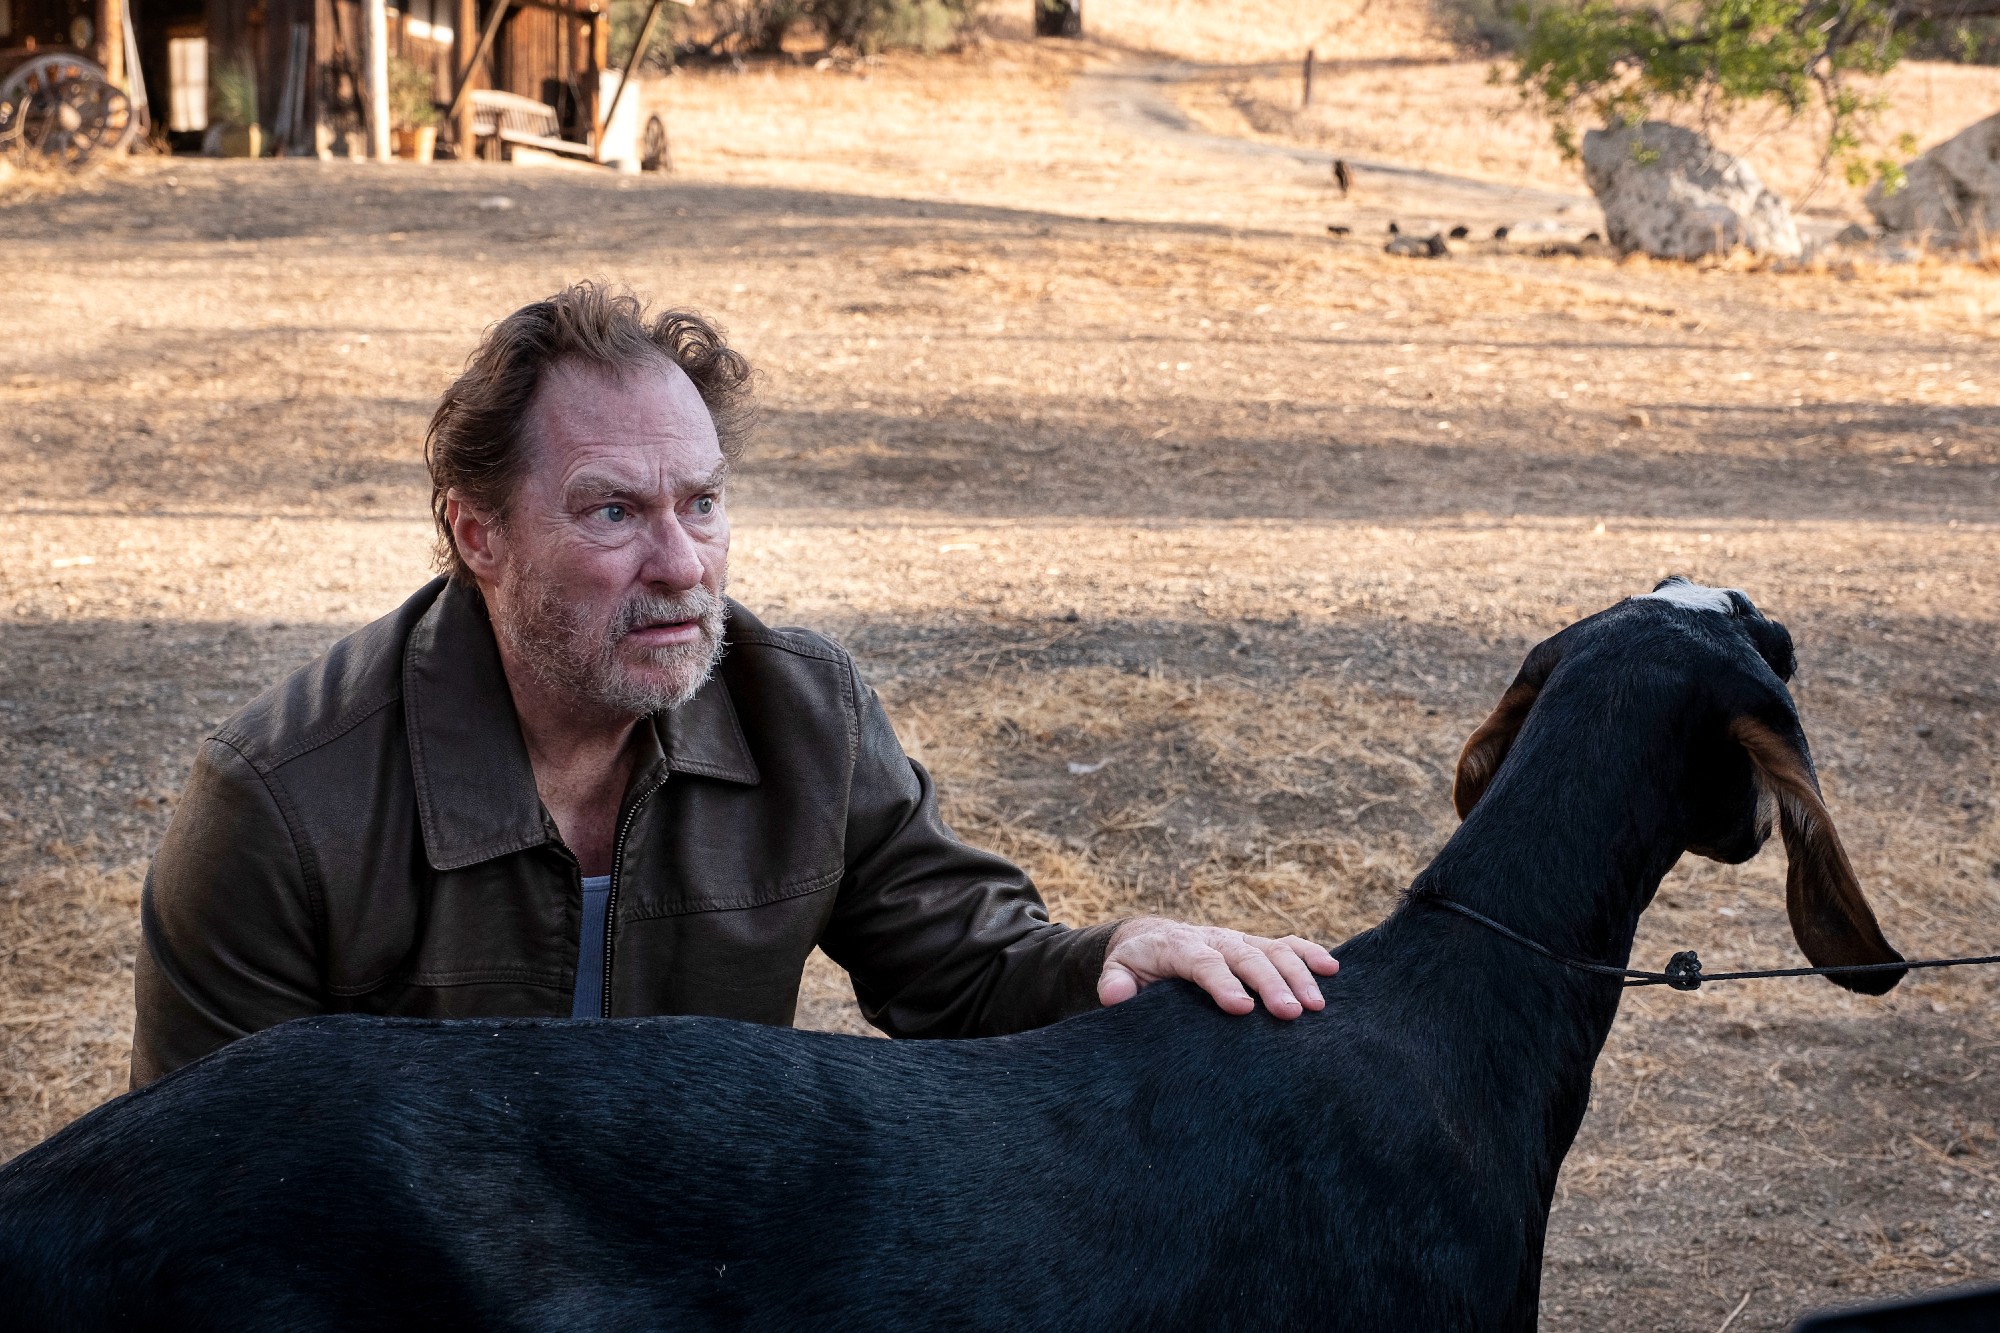 Barry star Stephen Root